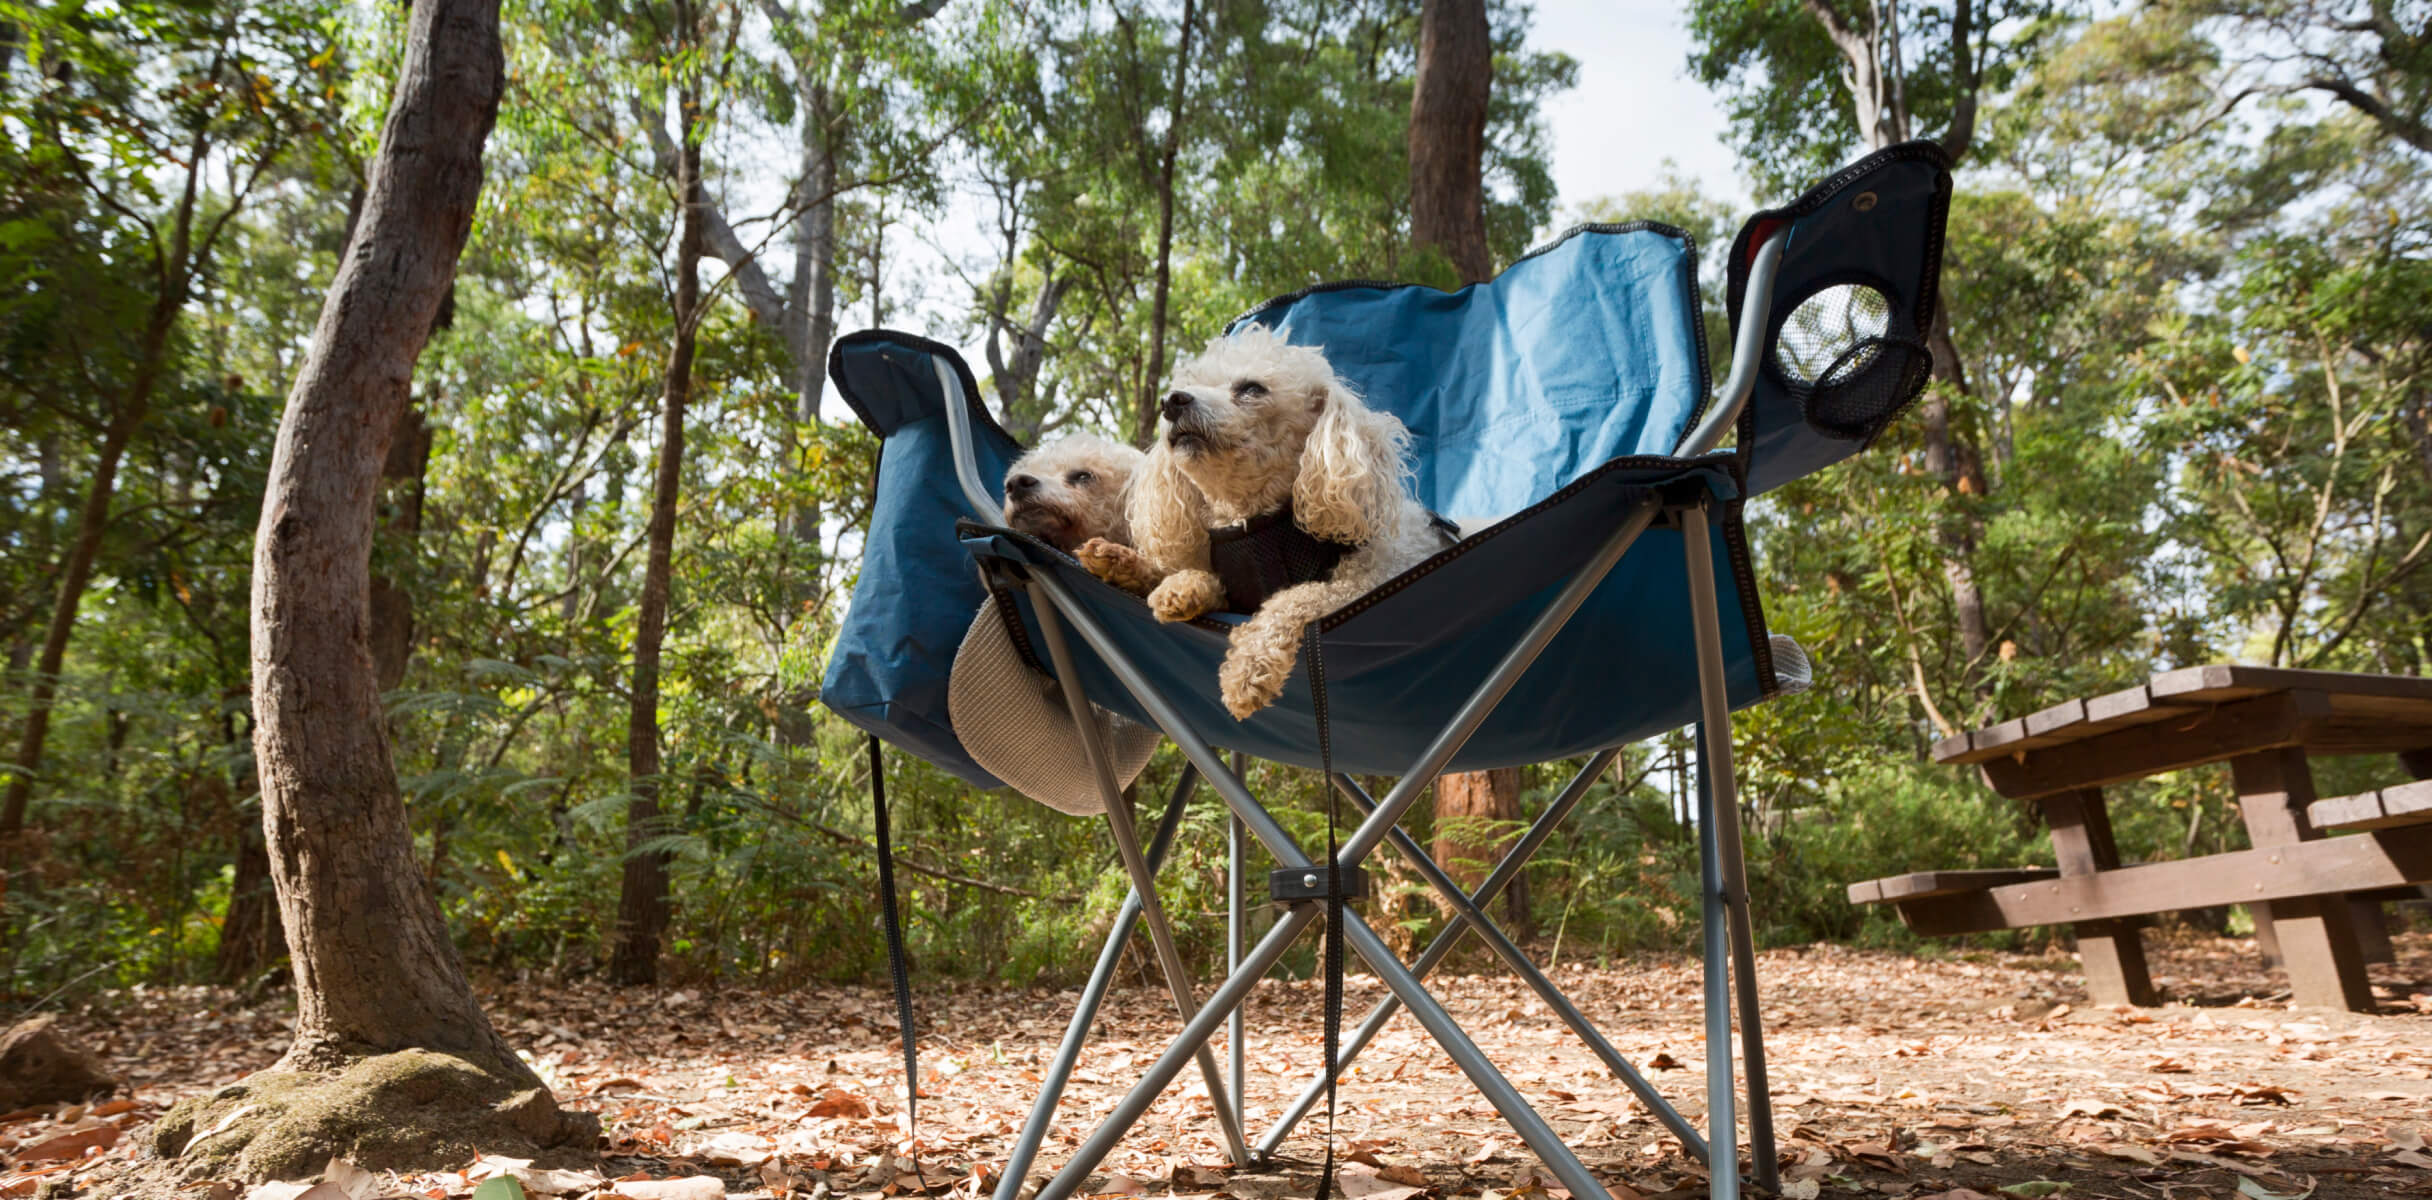 Dog sitting on a camping chair